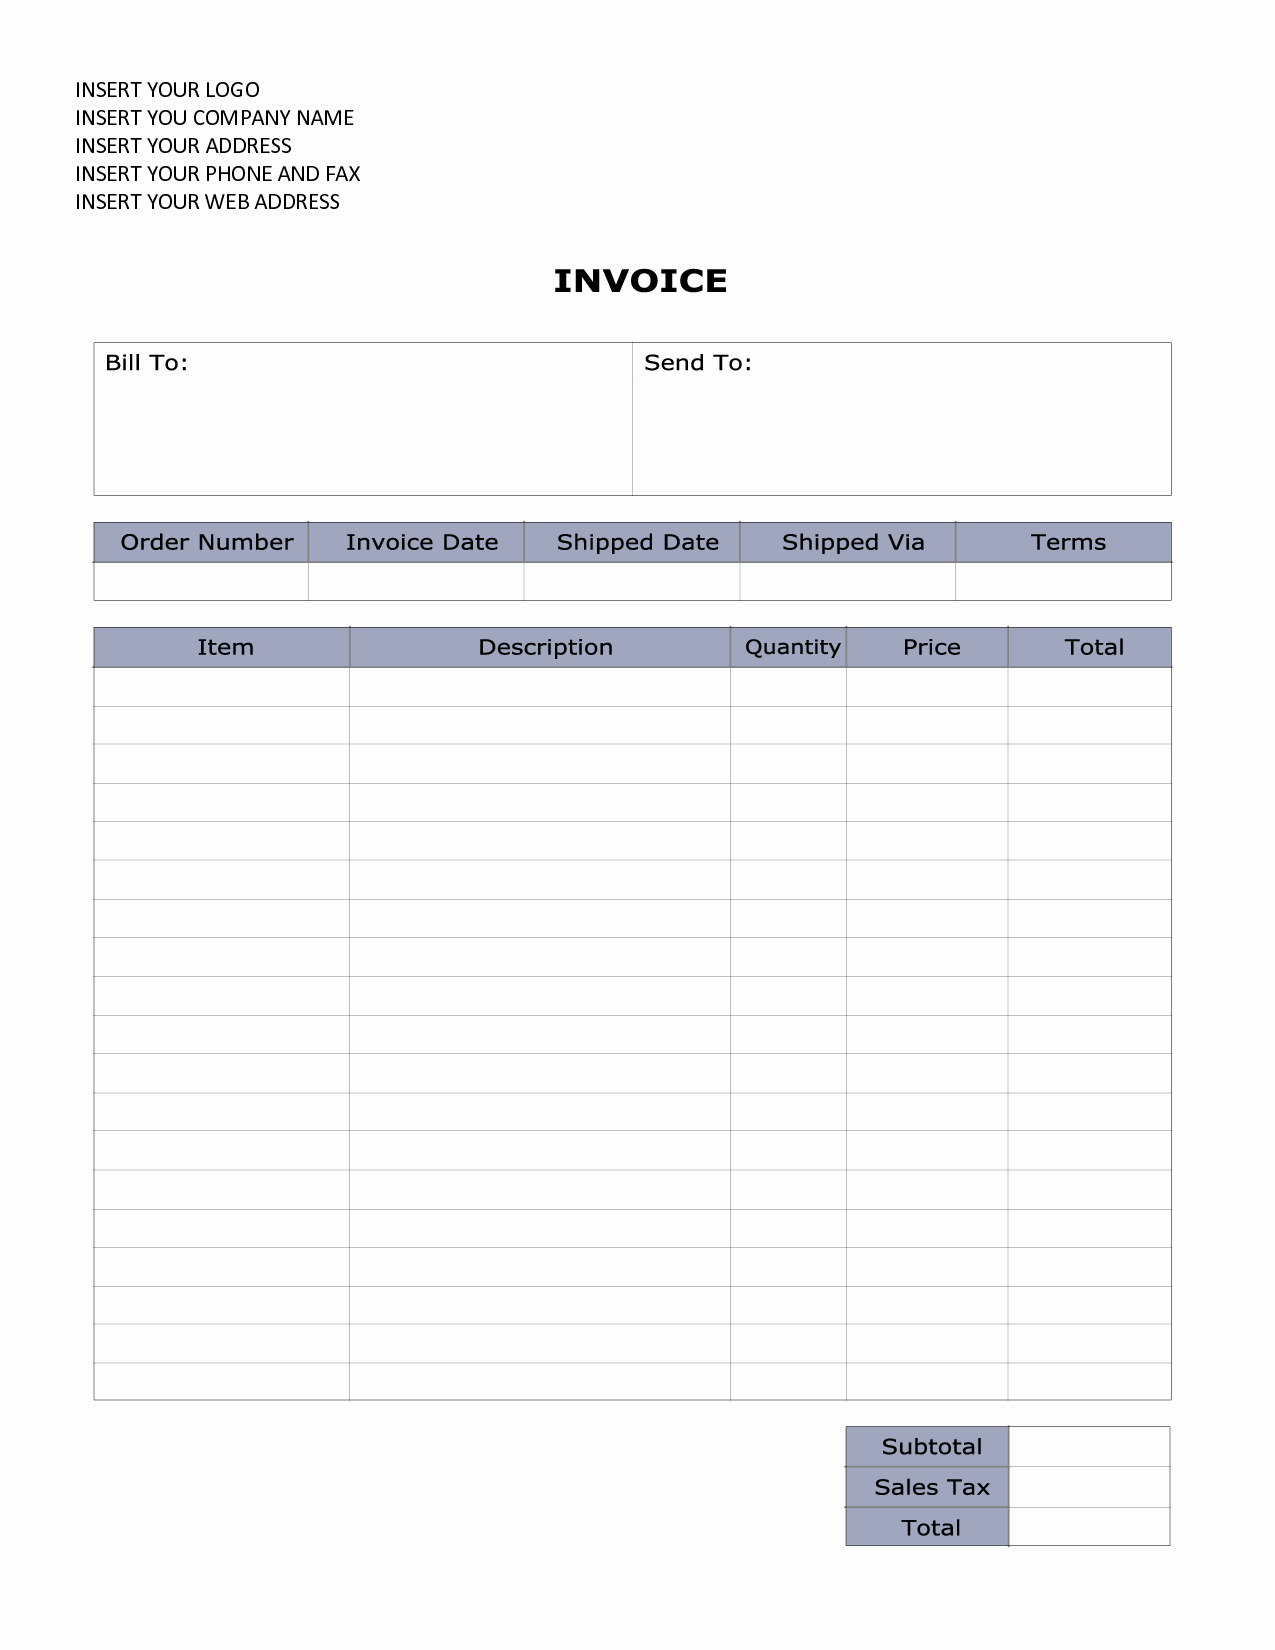 Basic Invoice Template Word Awesome Invoice Template Word 2010